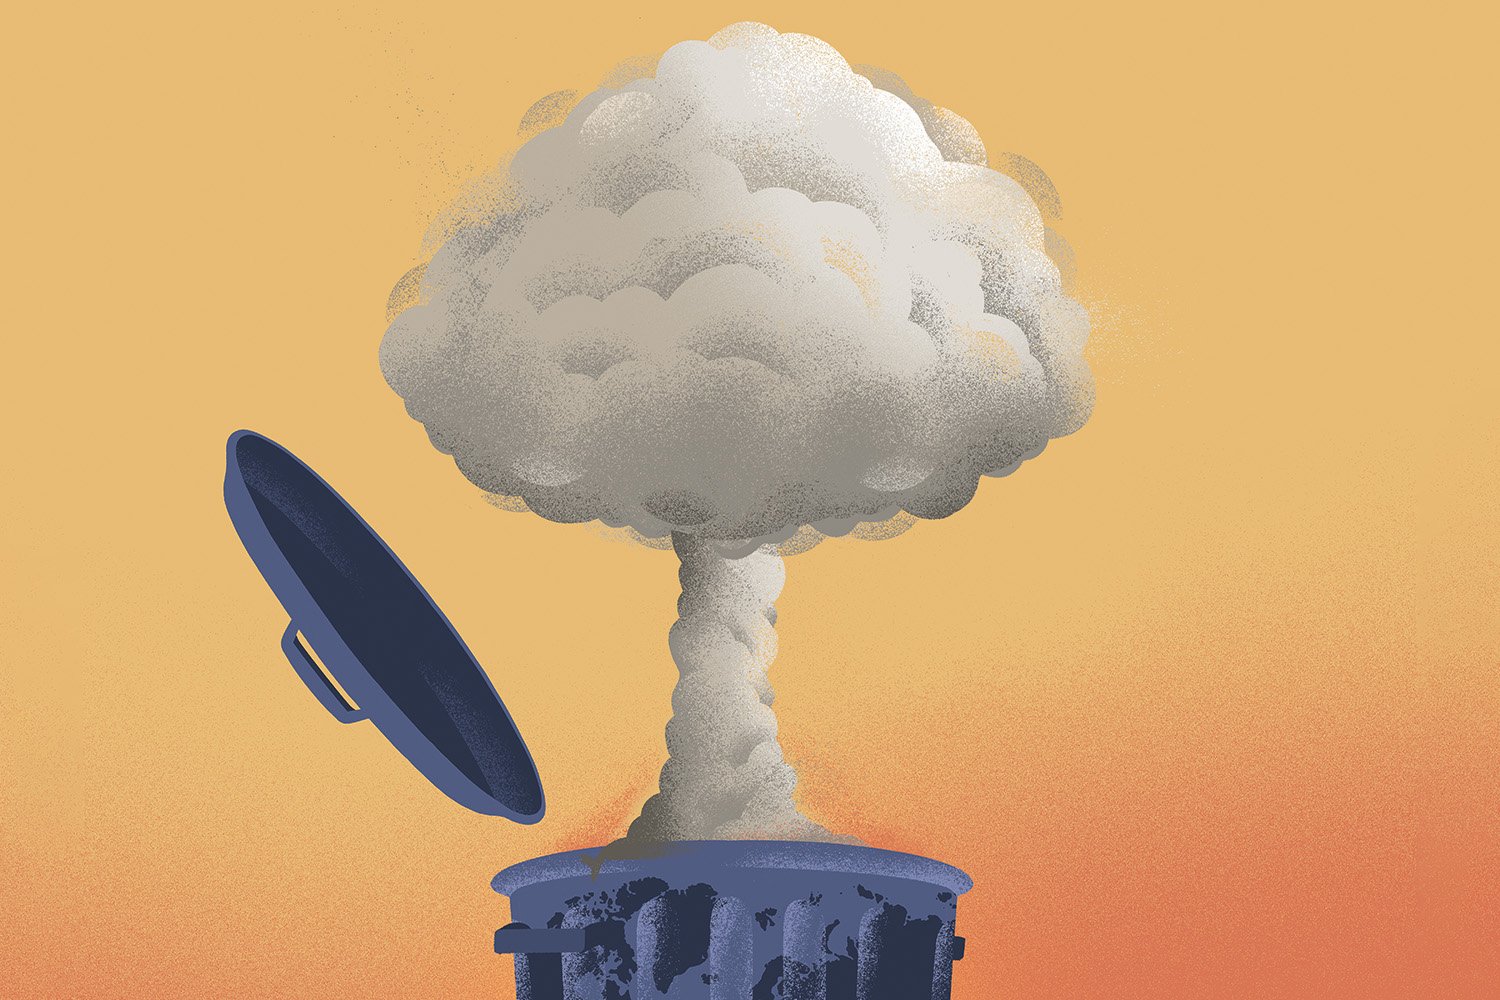 An illustration shows a nuclear cloud rising from the dustbin of history.